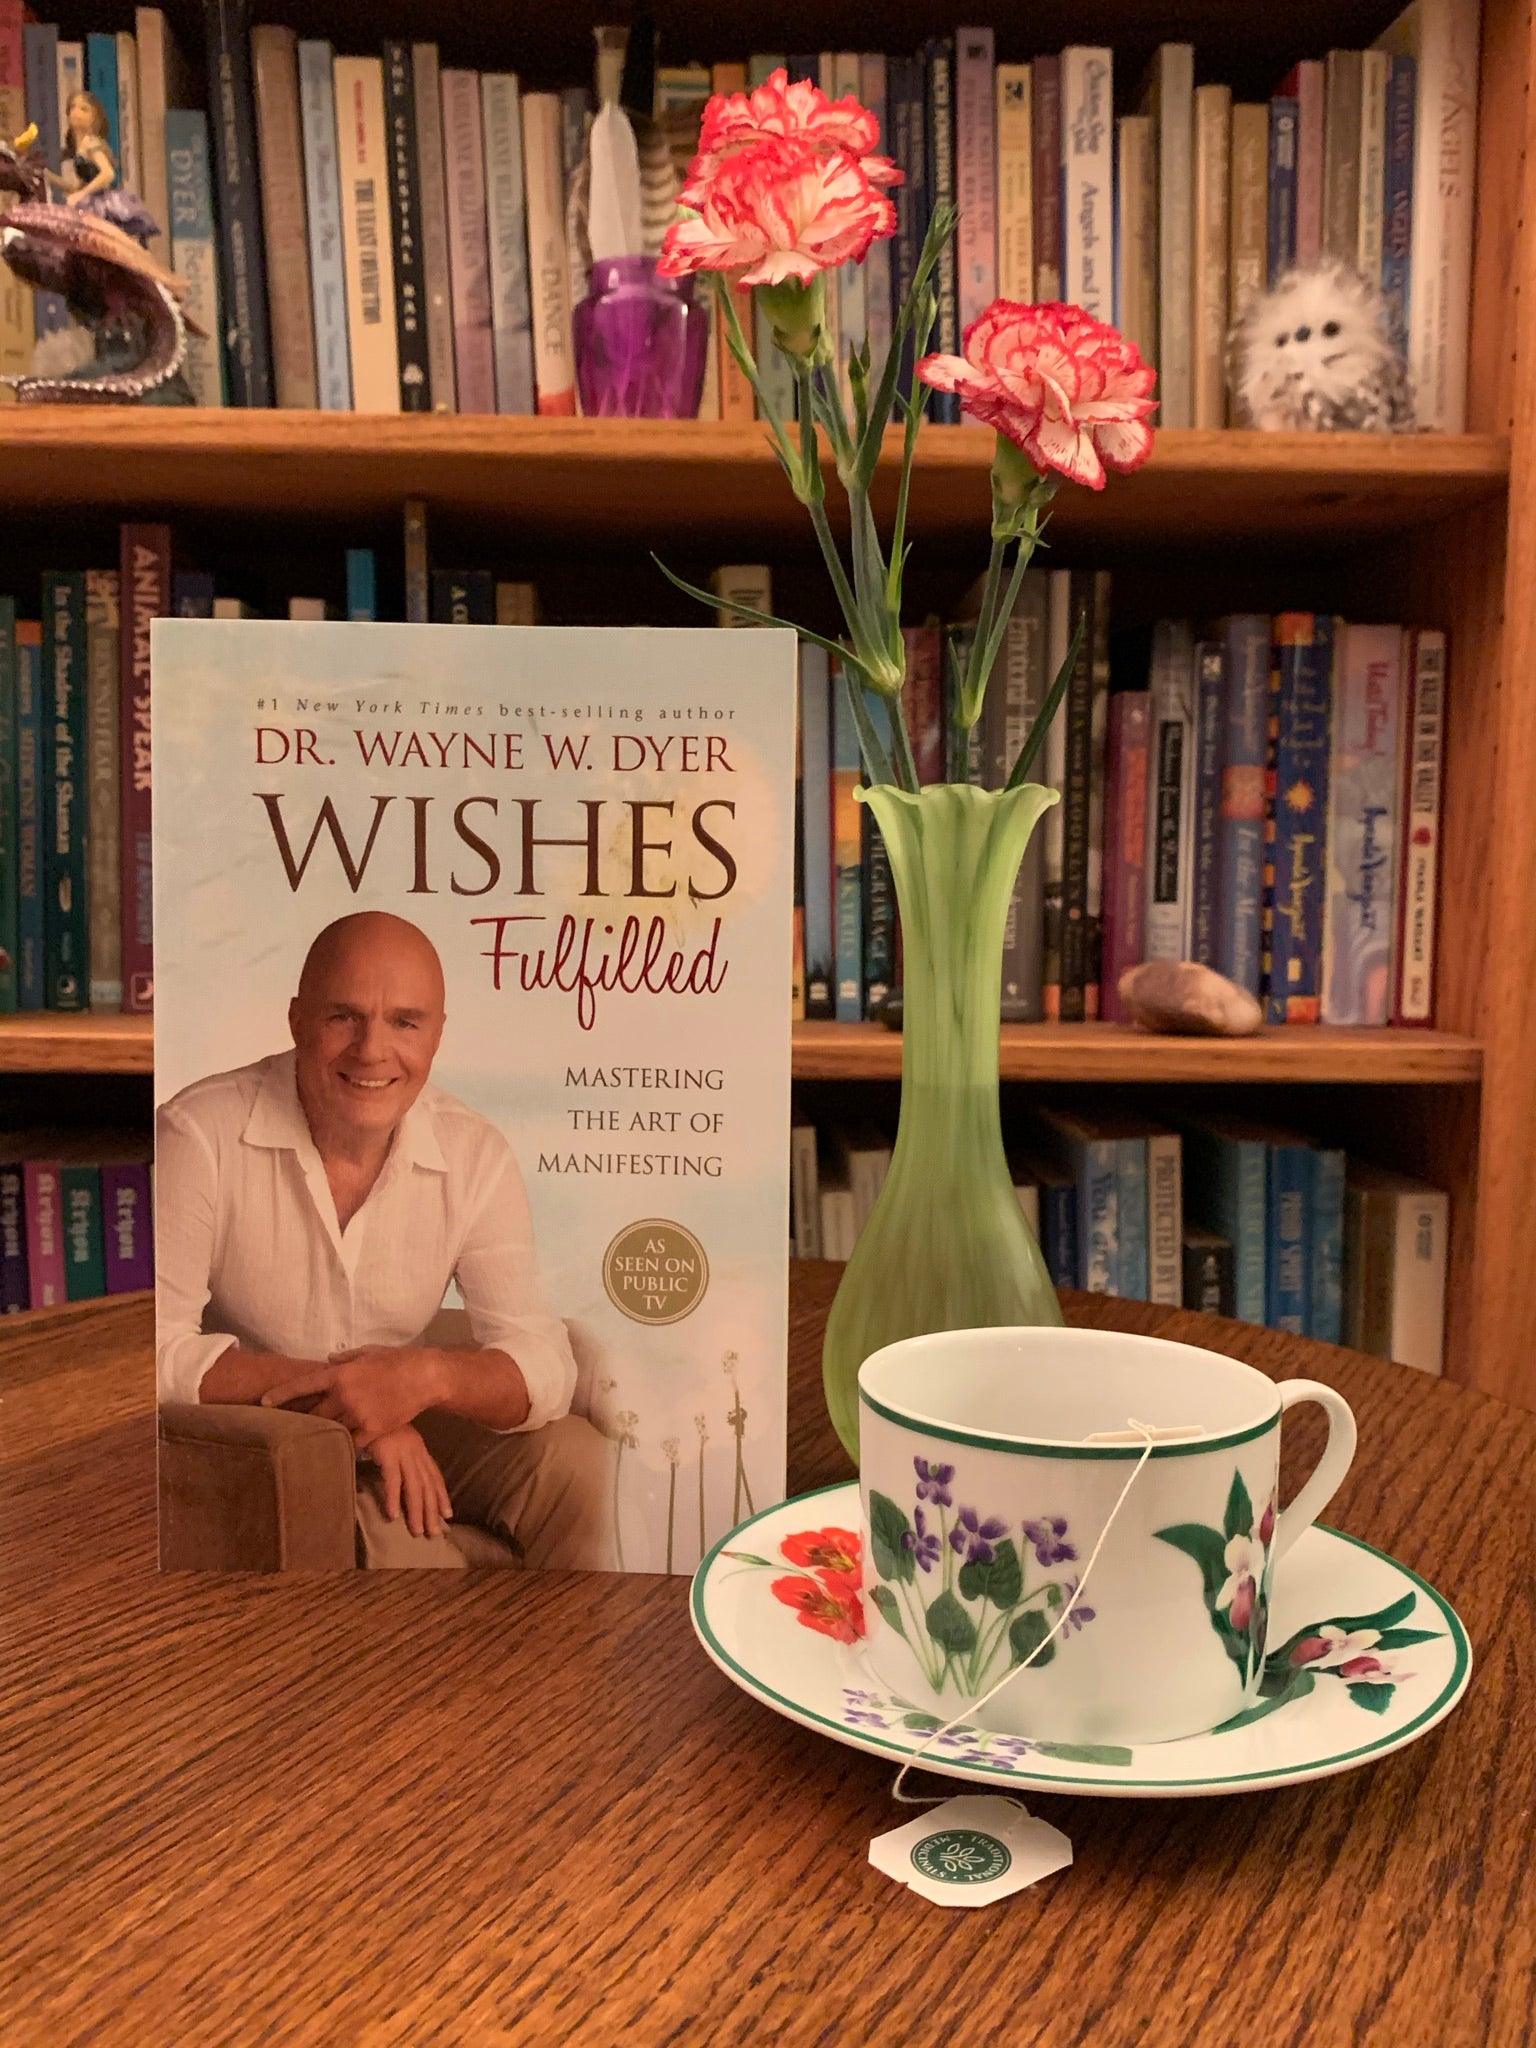 Wishes Fulfilled by Wayne Dyer will help you to manifest anything you desire, including your purpose in life. "Your wishes - all of them - can indeed be fulfilled be using your imagination and practicing the art of assuming the feeling your wishes being fulfilled, and steadfastly refusing to allow any evidence of the outer world to distract you from your intentions. Cost is $15.95